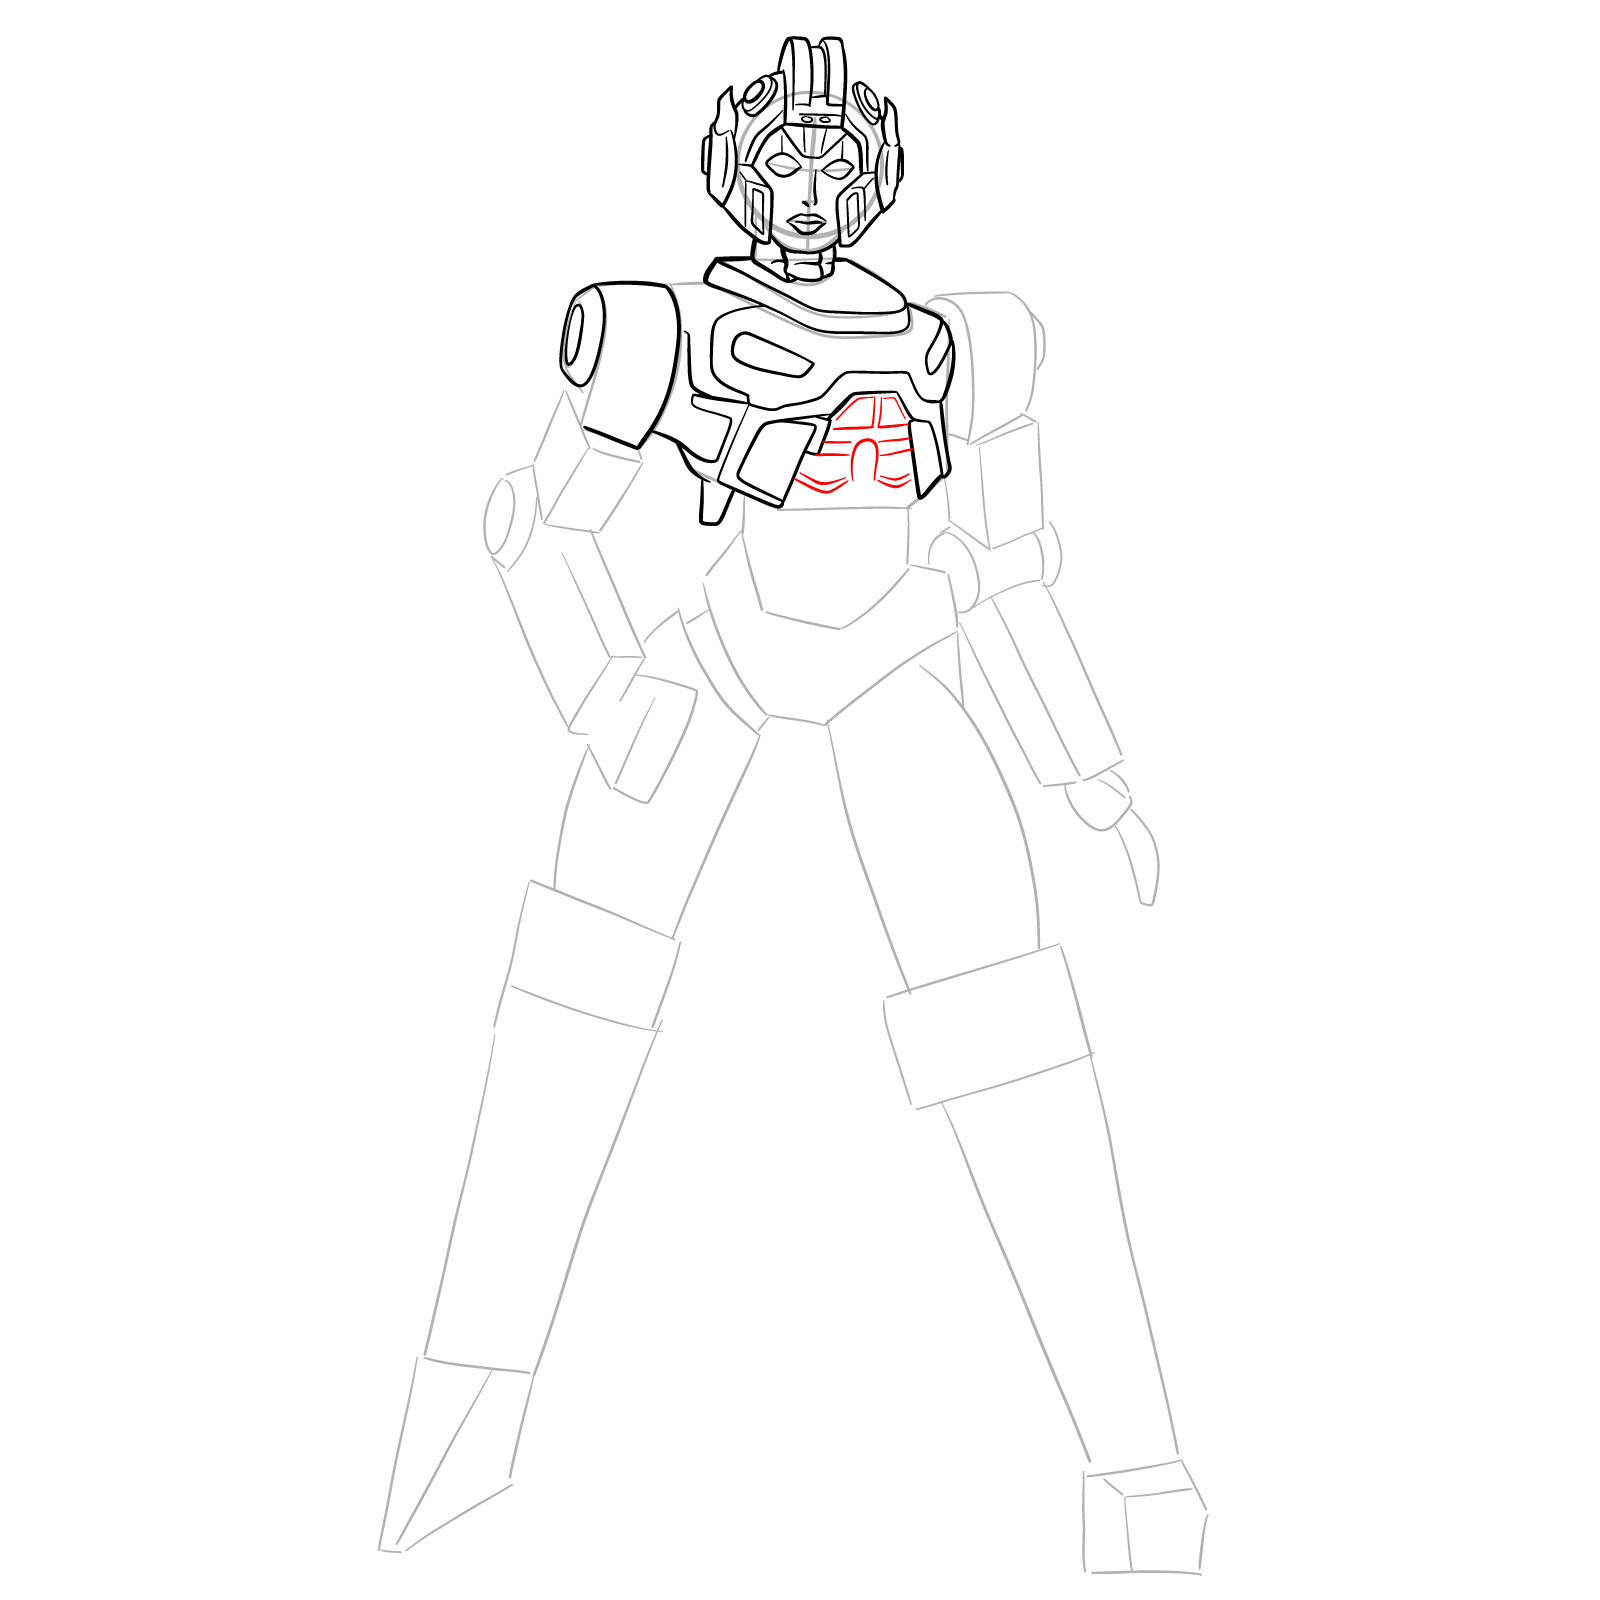 How to draw Arcee from Transformers Prime - step 18